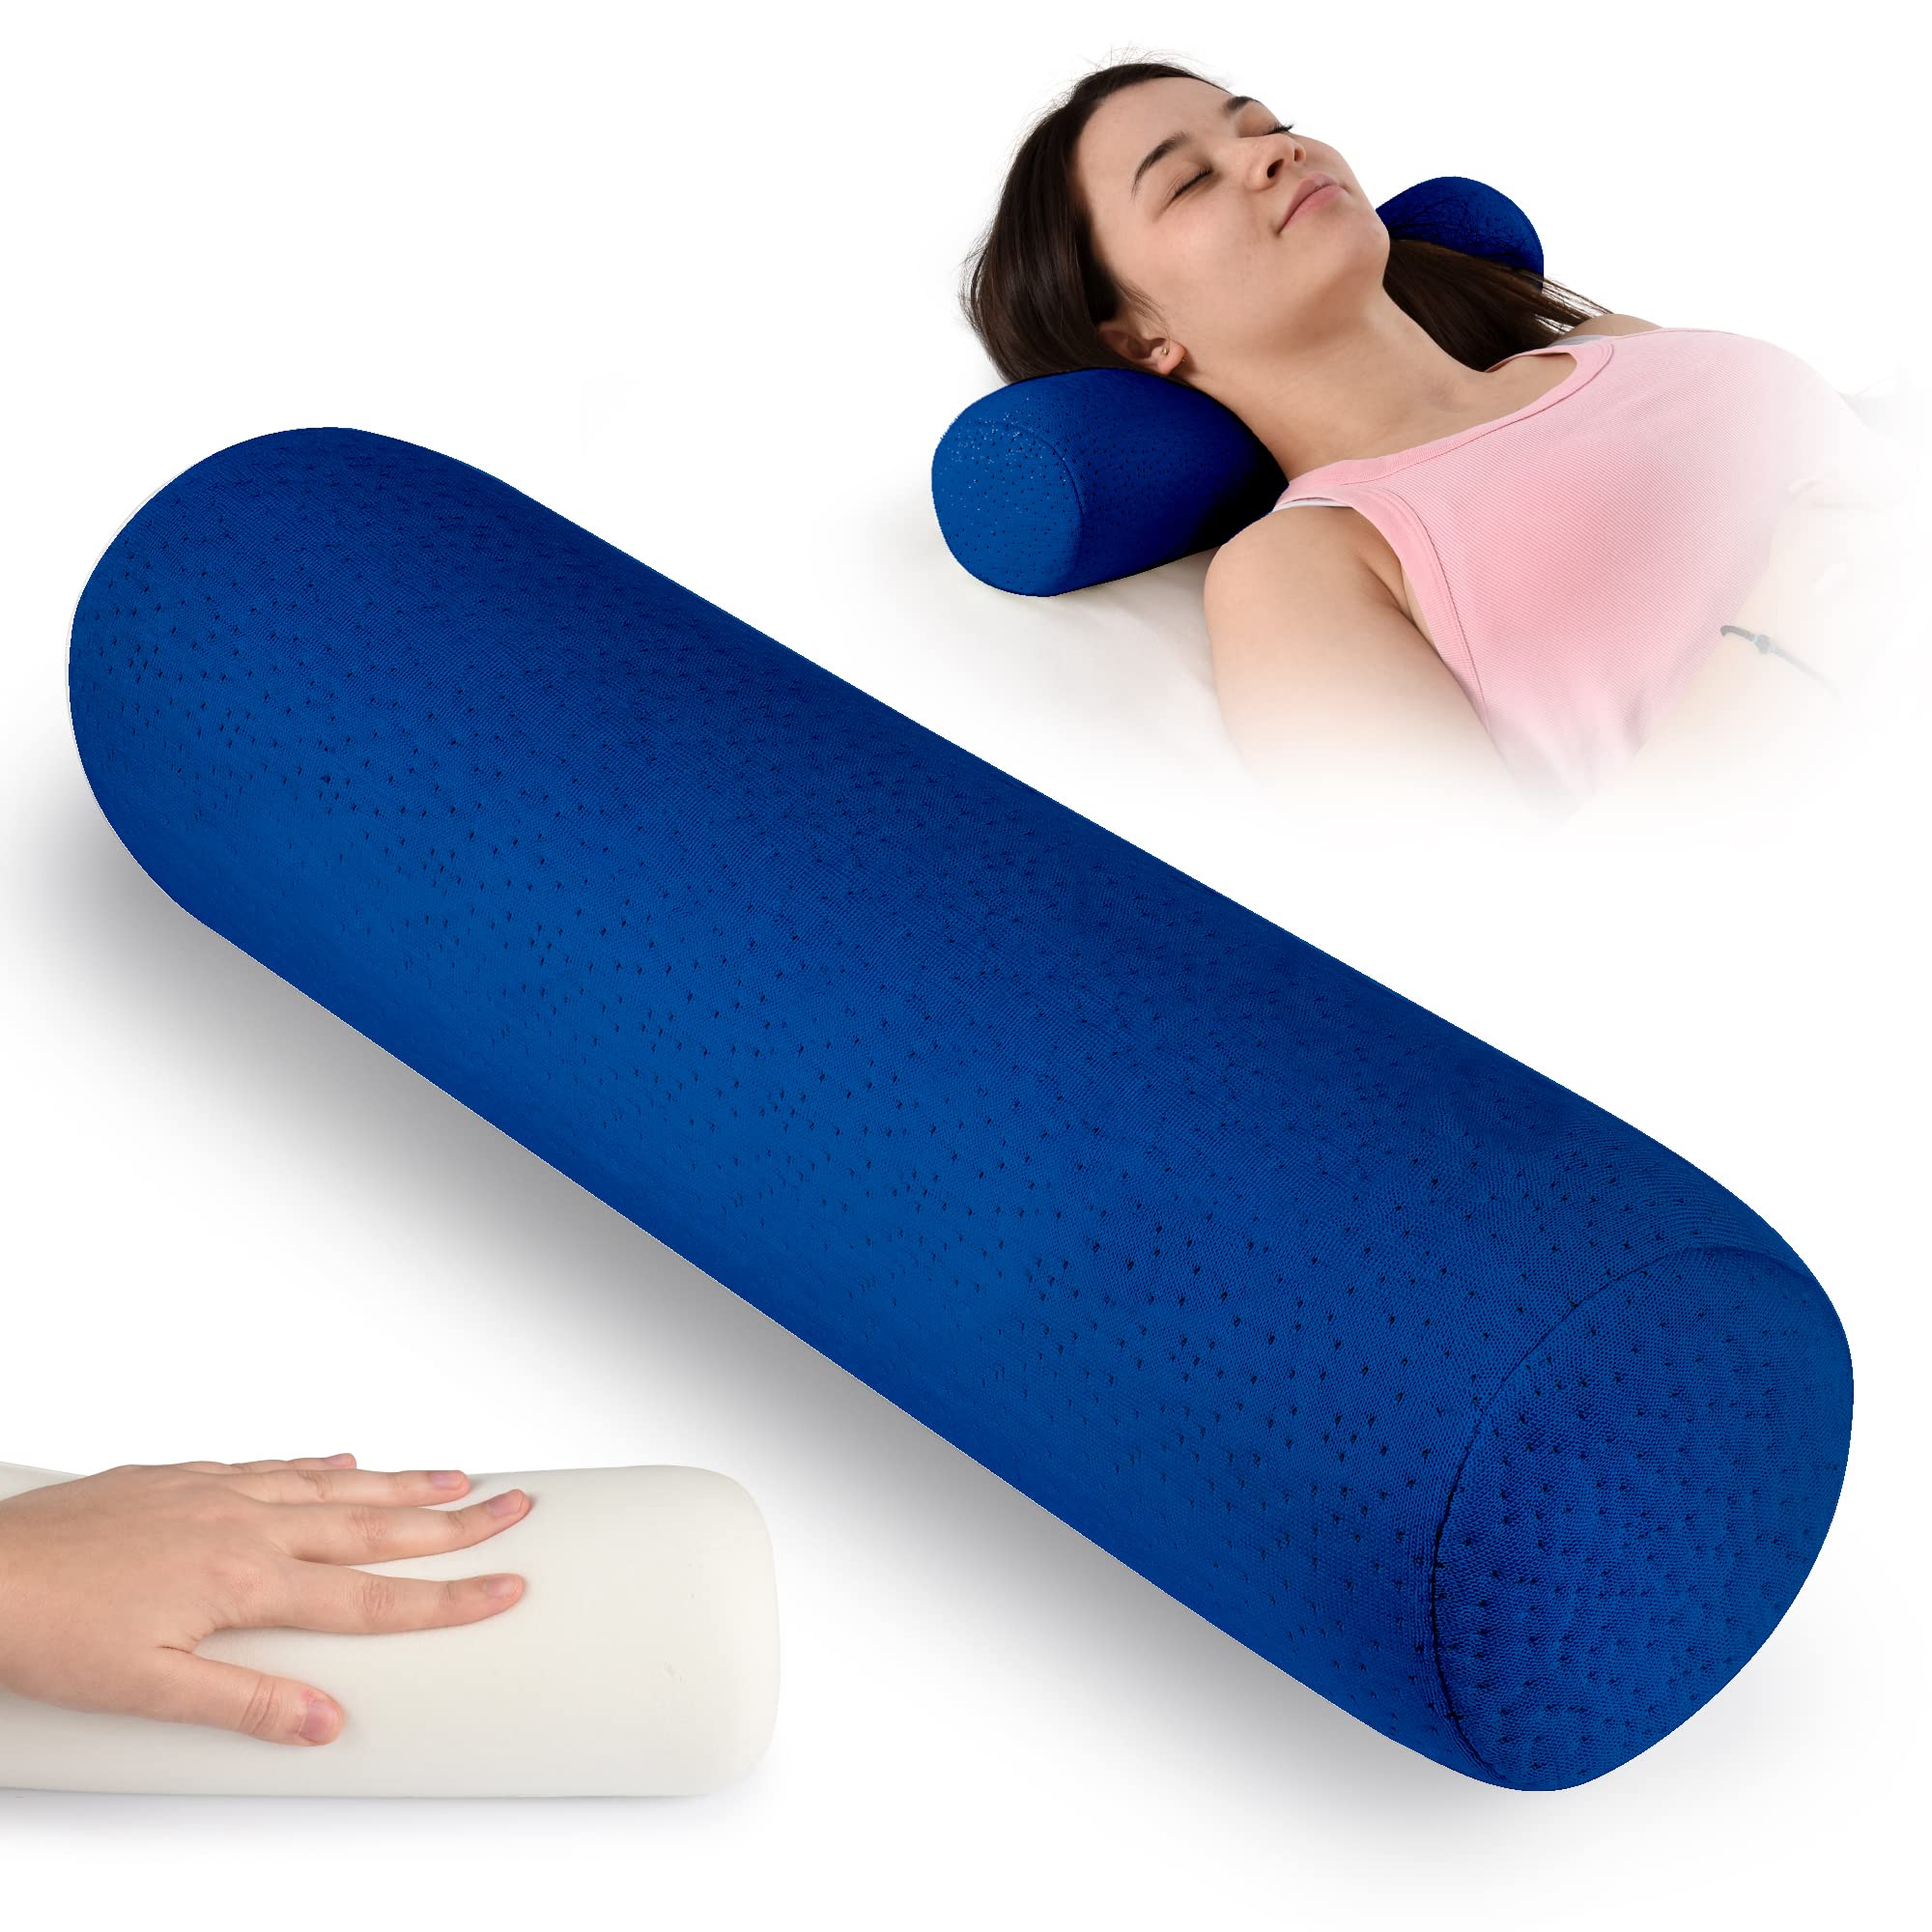 Support Plus Cervical Foam Roll Pillow - Lumbar, Spine, Neck Support For  Side and Back Sleepers - Bolster Pillow for Neck, Back, Knees with  Zippered, Removable, Breathable Mesh Cover - Foam Roller